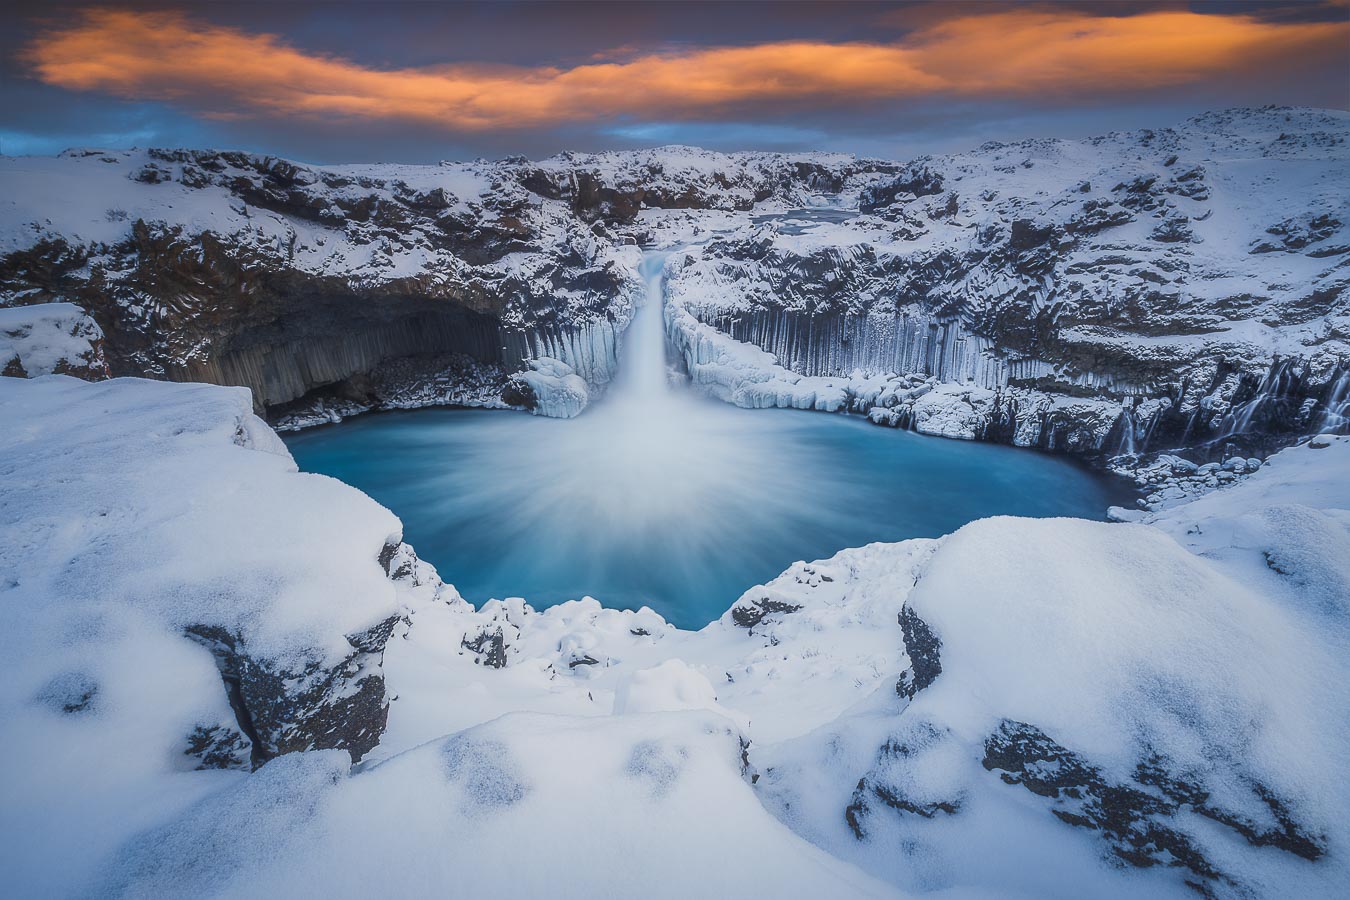 Aldeyjarfoss waterfall is tricky to get to but it's so worth it as it's a stunning natural sight.